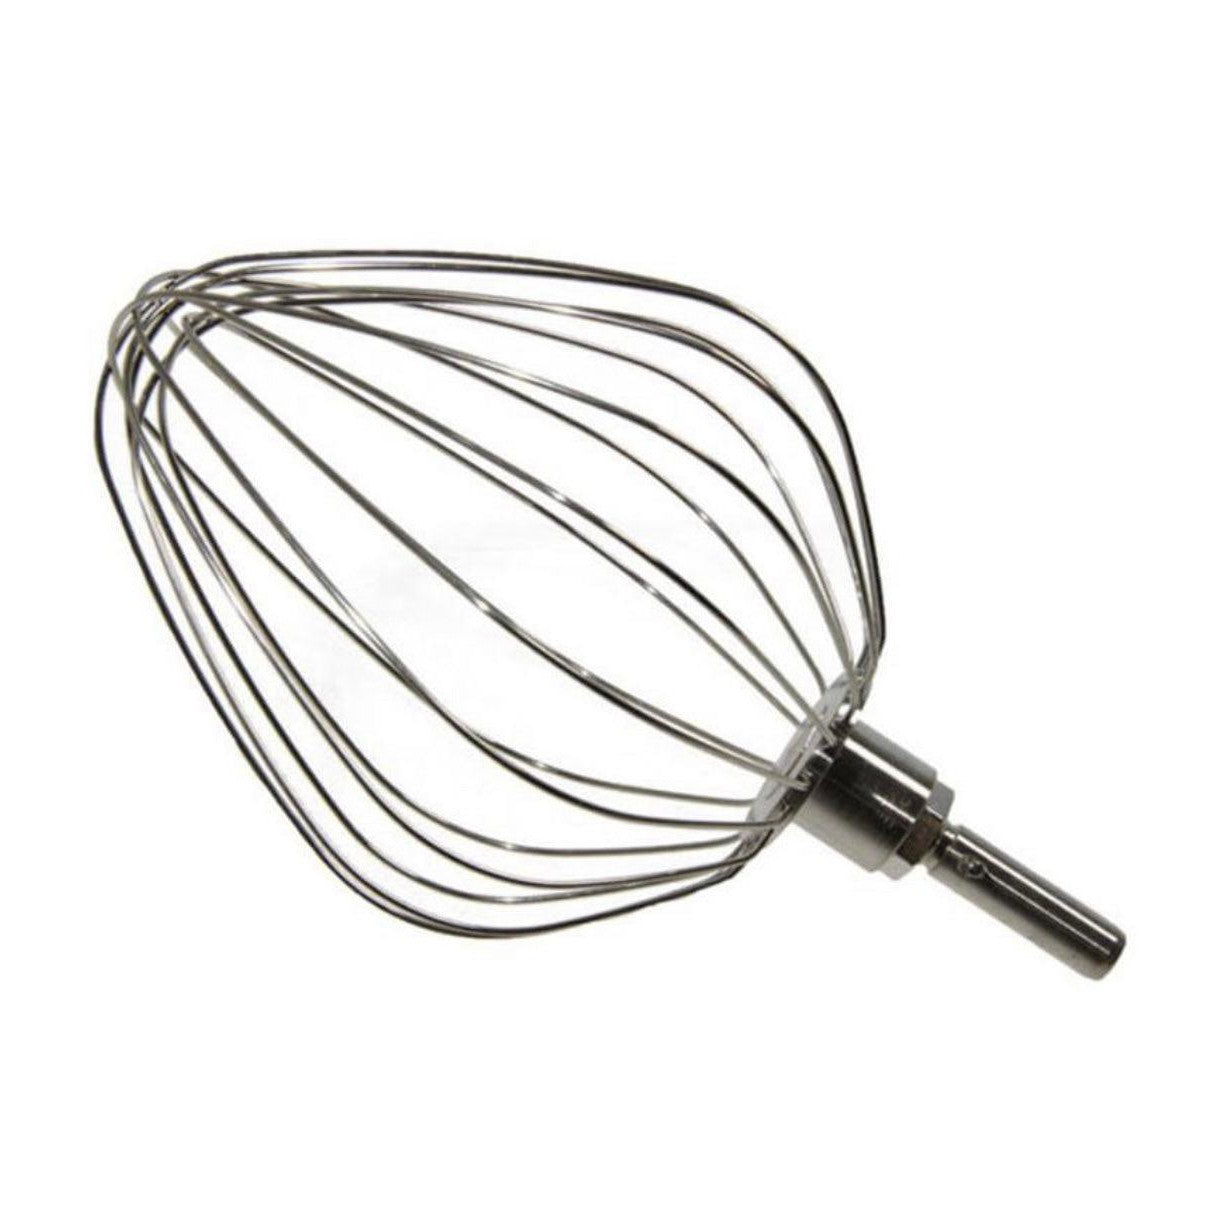 Kenwood Major or XL Stainless Steel Whisk